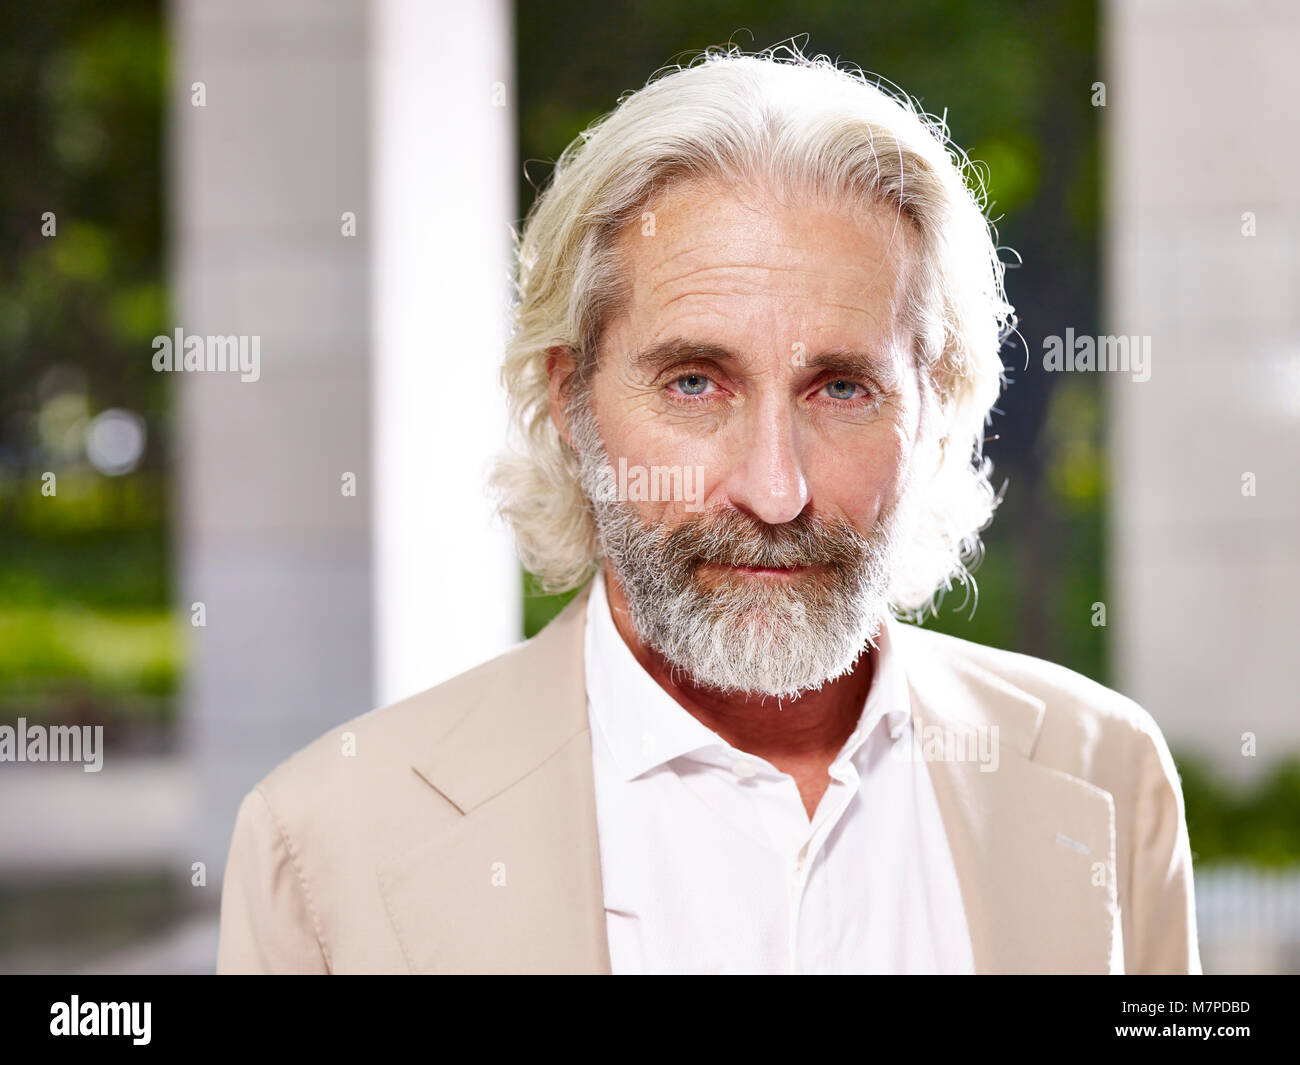 portrait of an caucasian european design professional looking at camera with serious facial expression Stock Photo